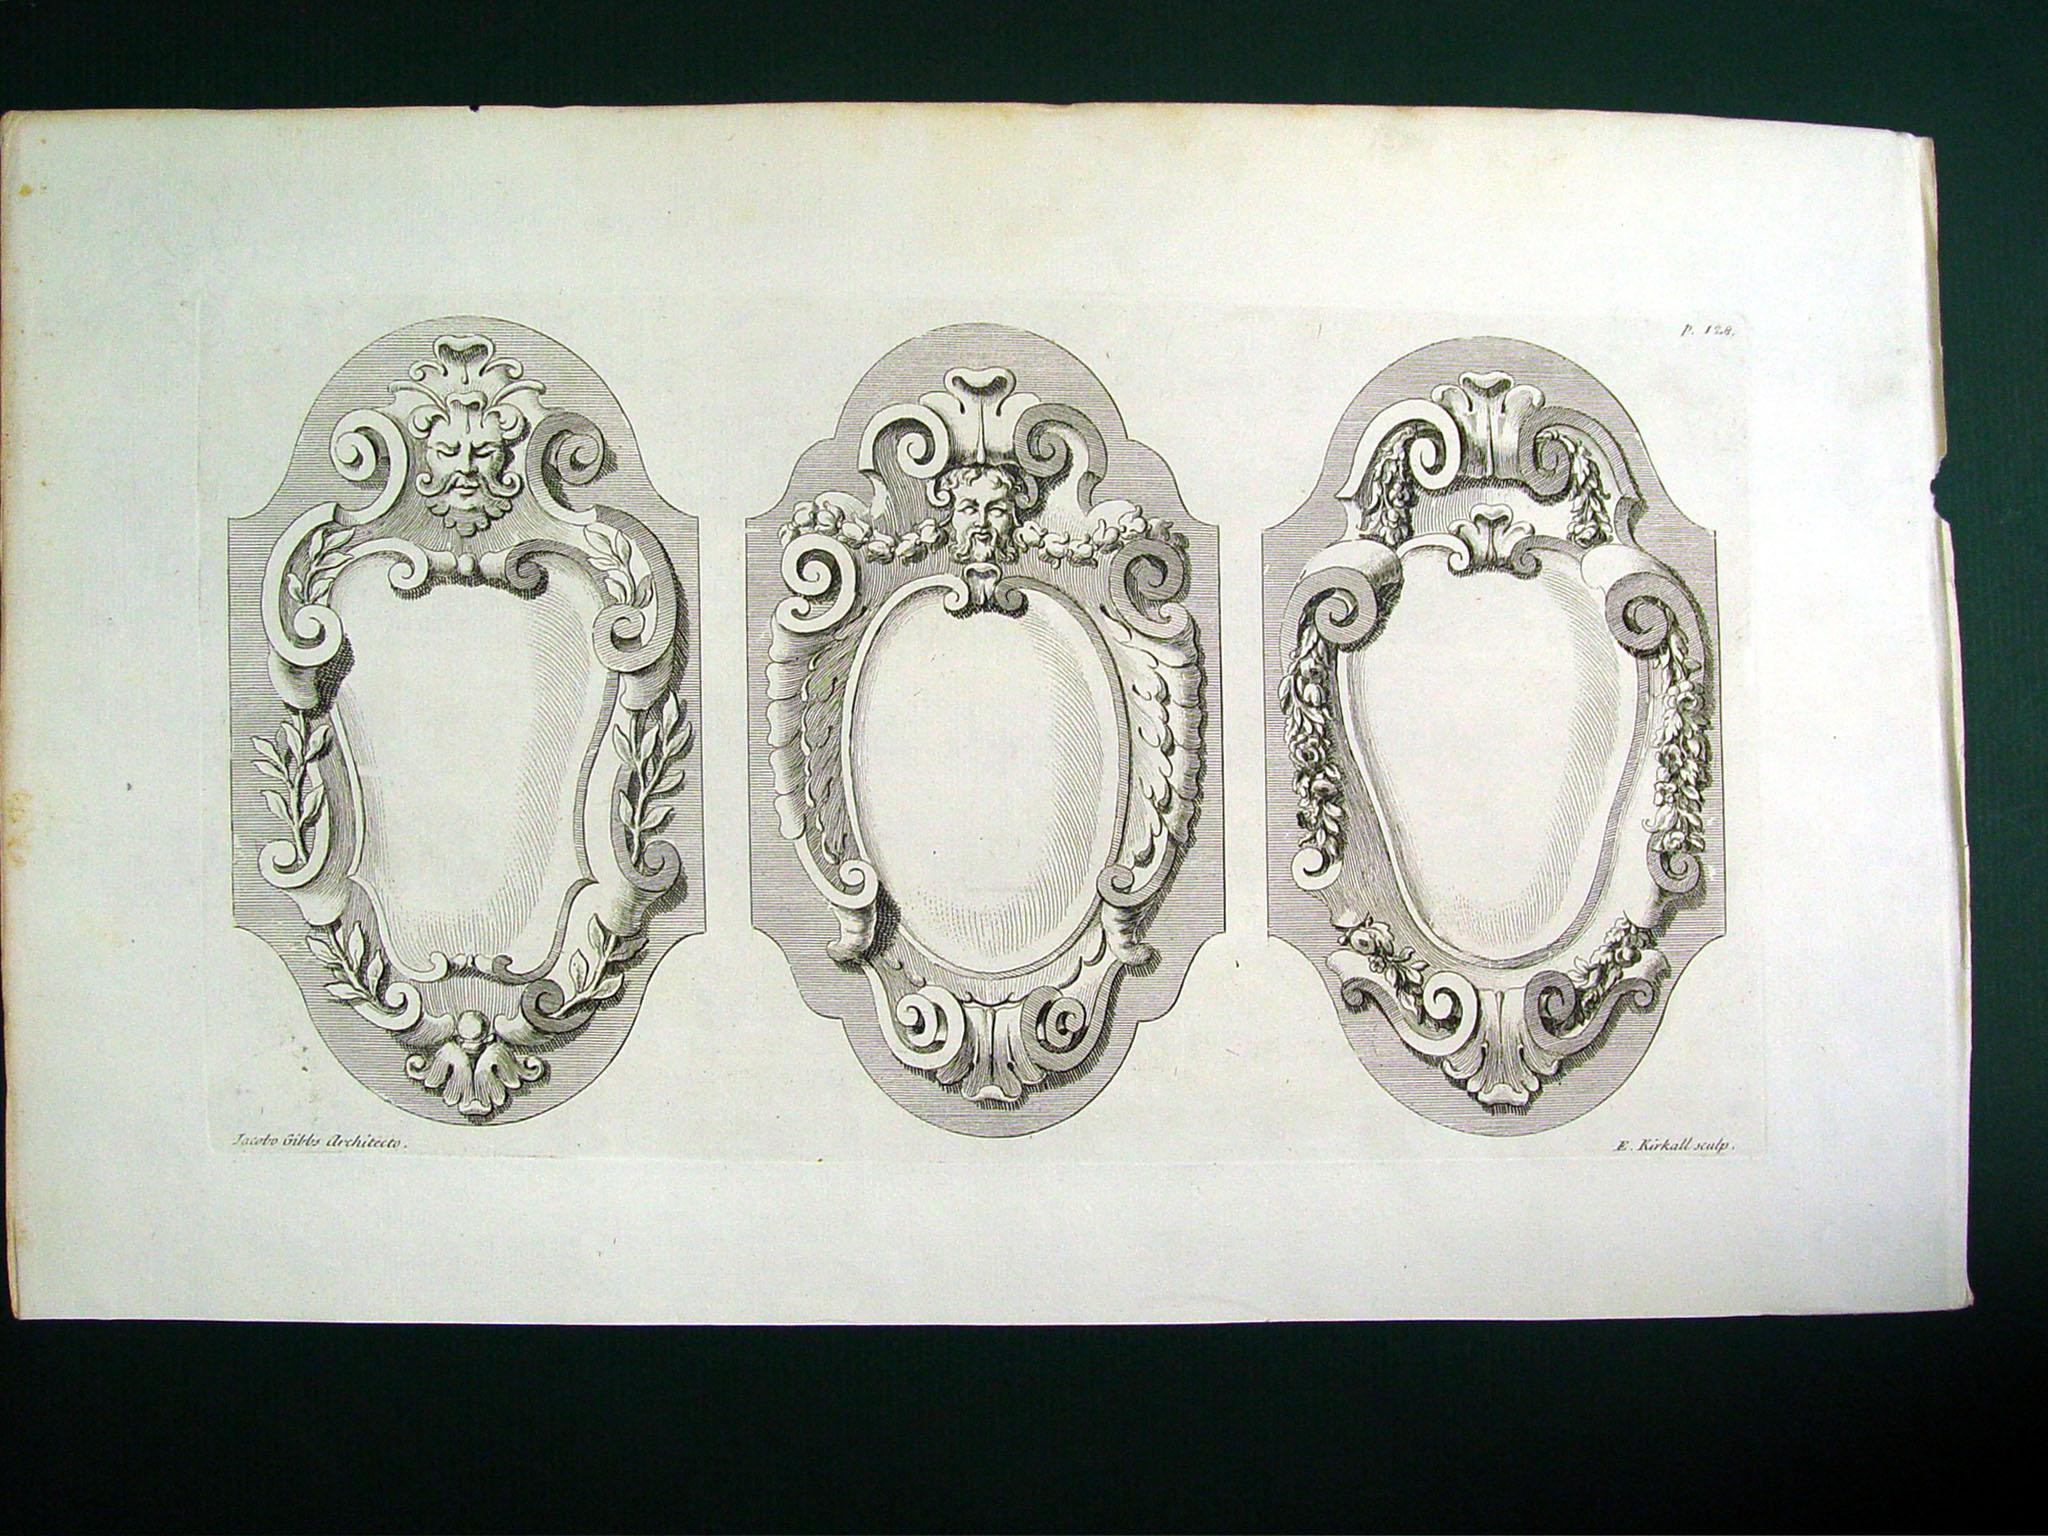 Architectural ornaments engraving from the folio by James Gibbs. Published by Bowyer, London, 1728. Unframed. Age toning, edge wear.